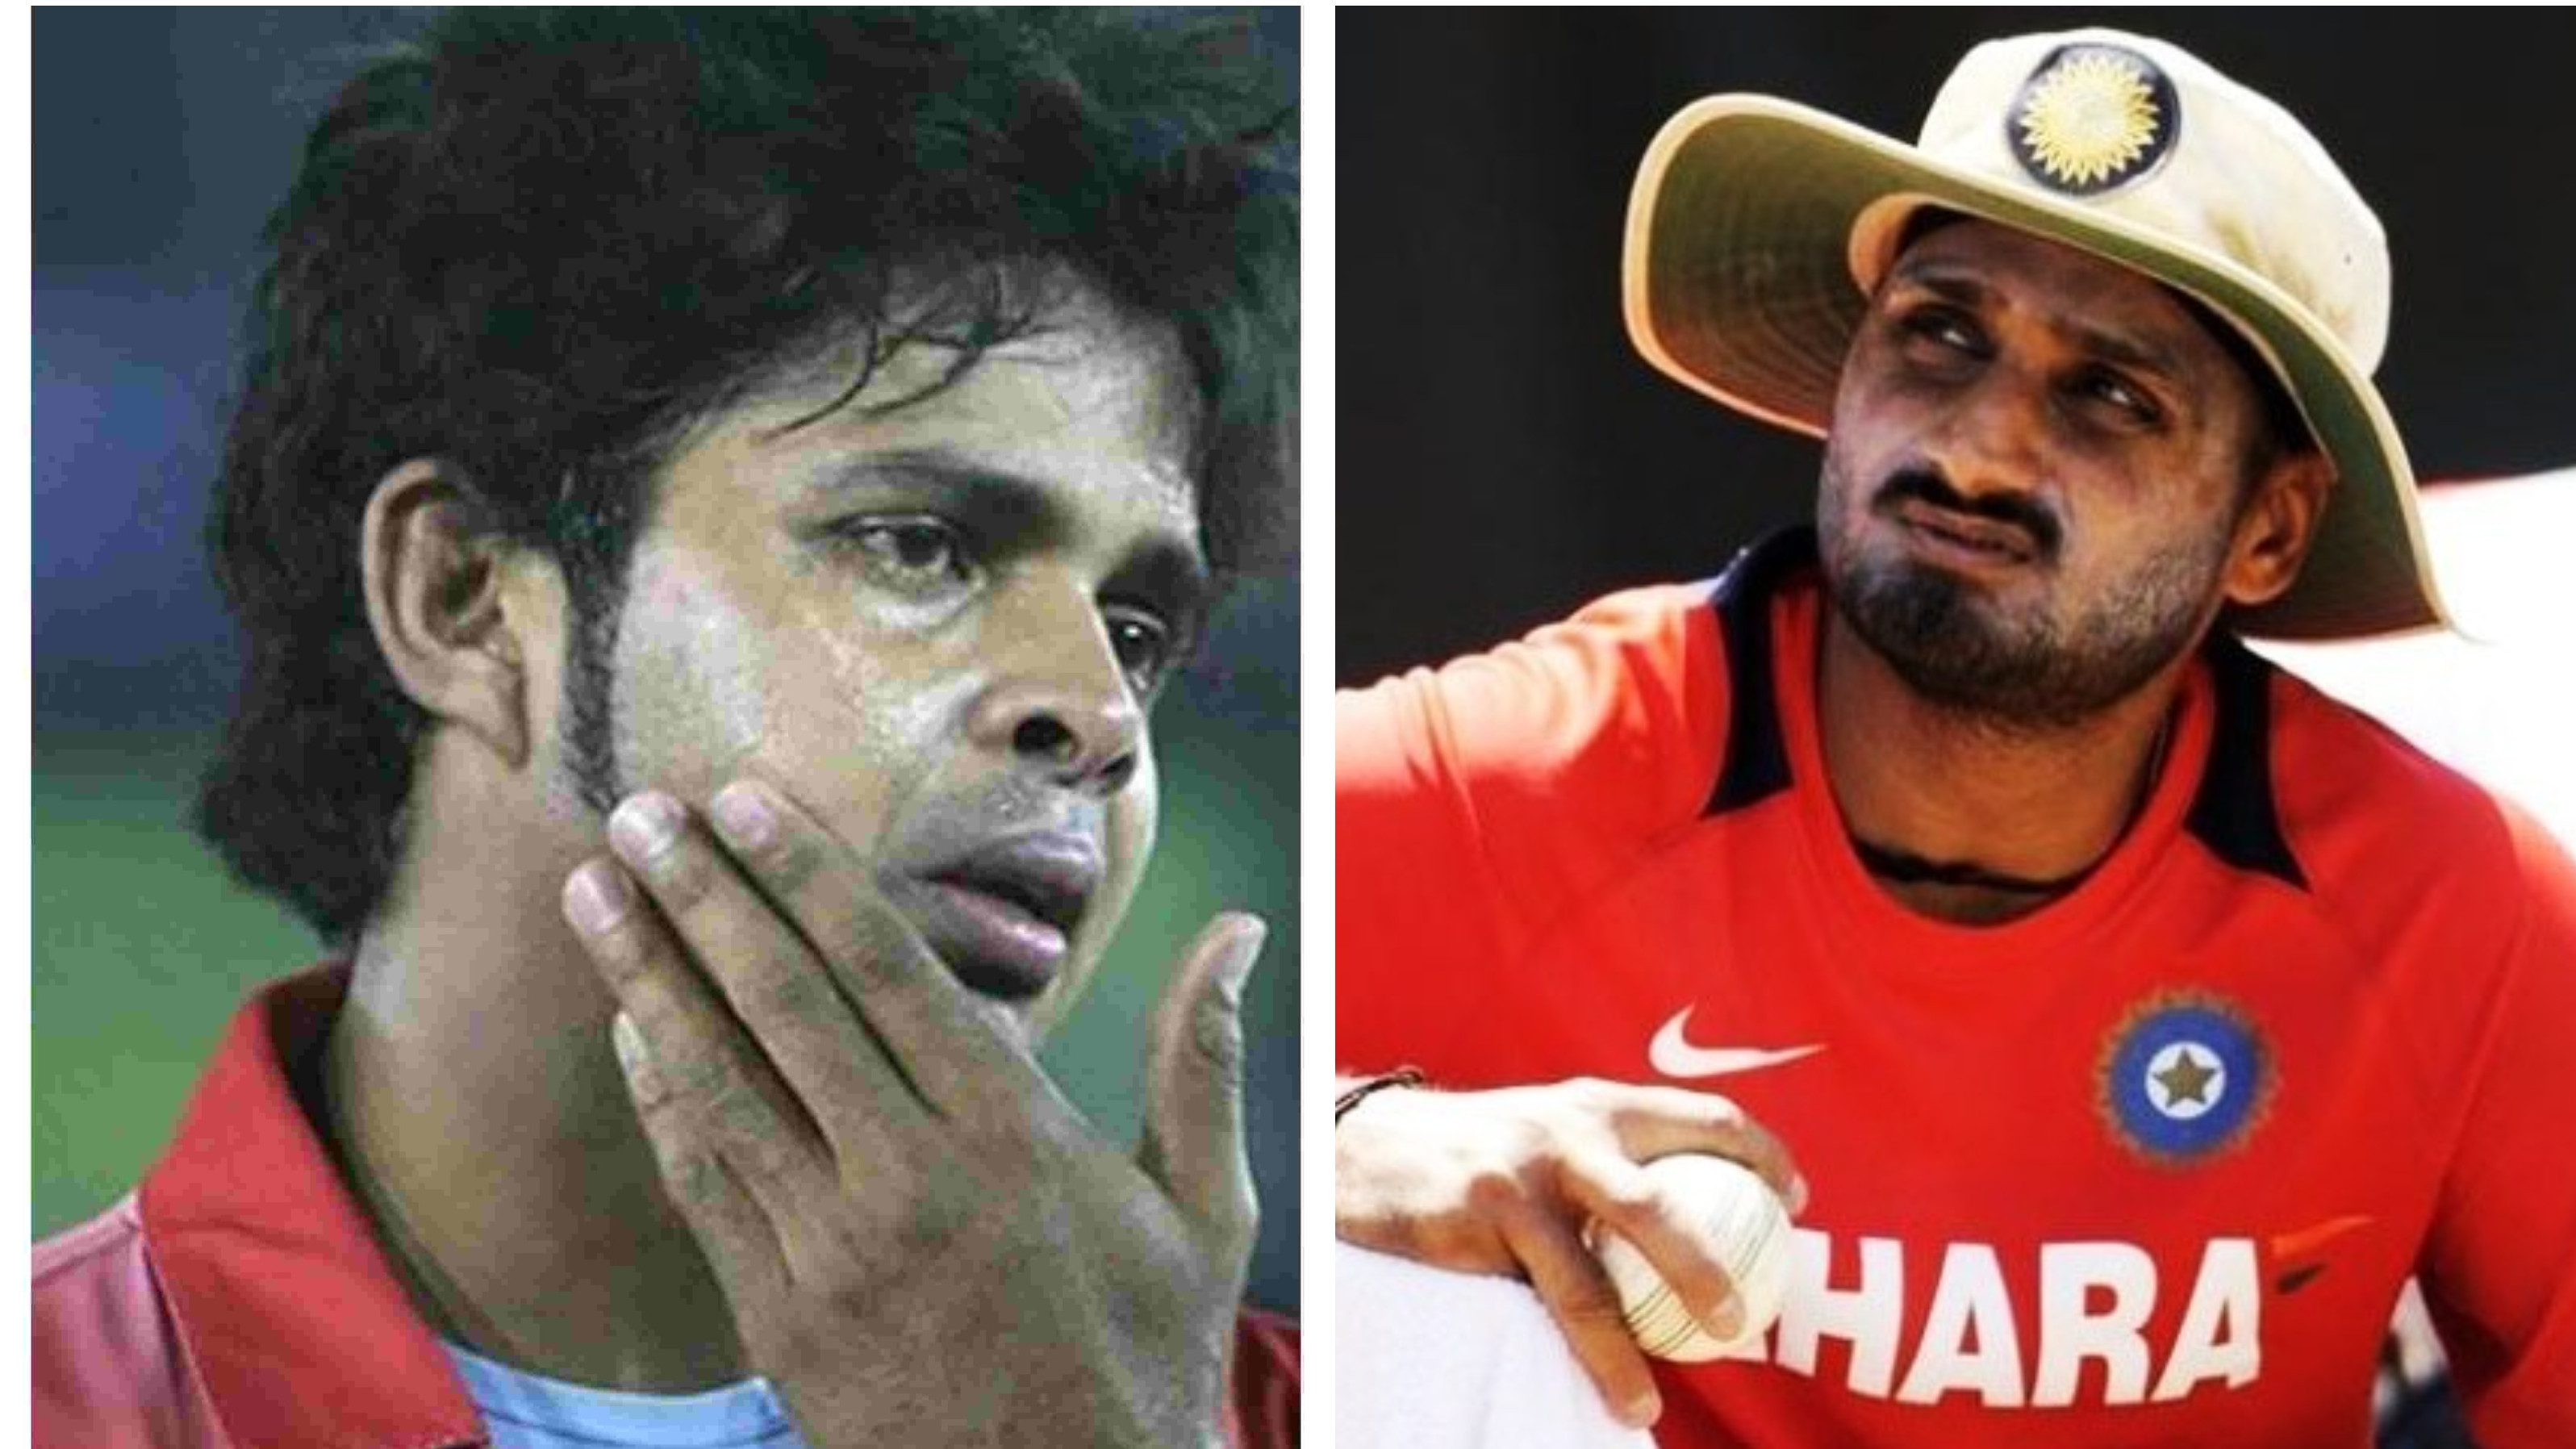 WATCH: “It should not have had happened”, Harbhajan regrets slapping Sreesanth in an IPL 2008 match